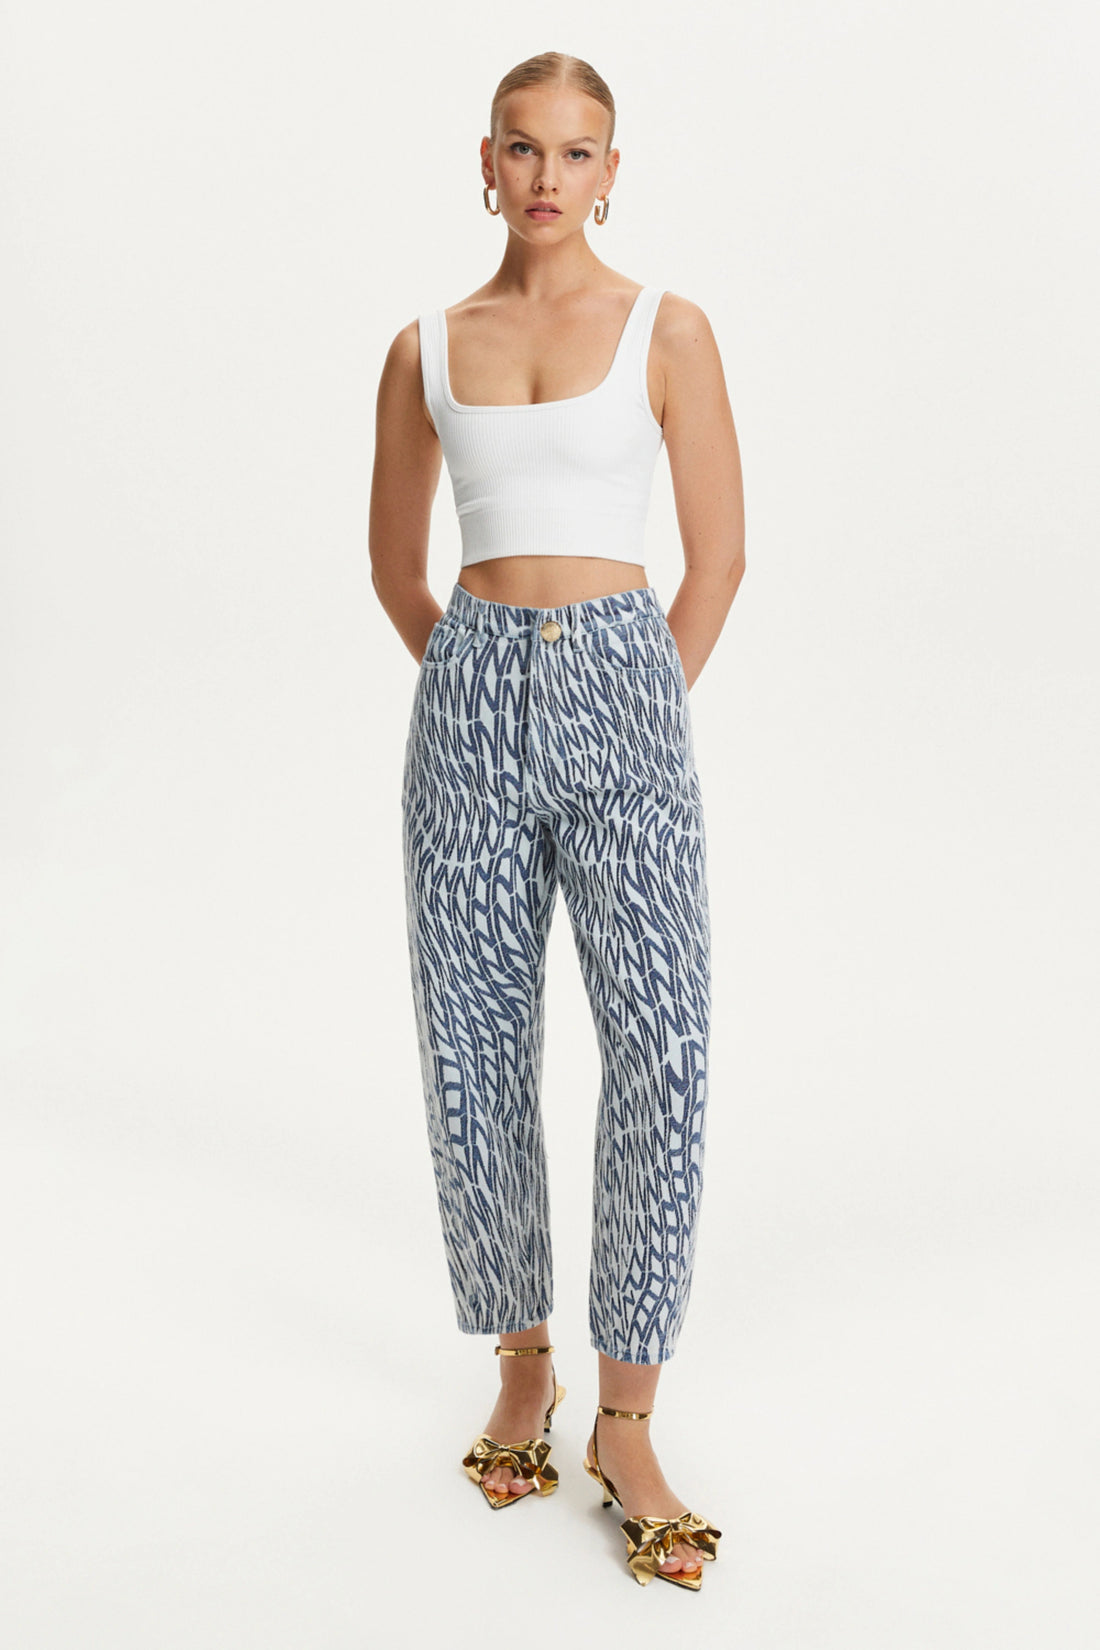 Patterned Mom Jean Trousers